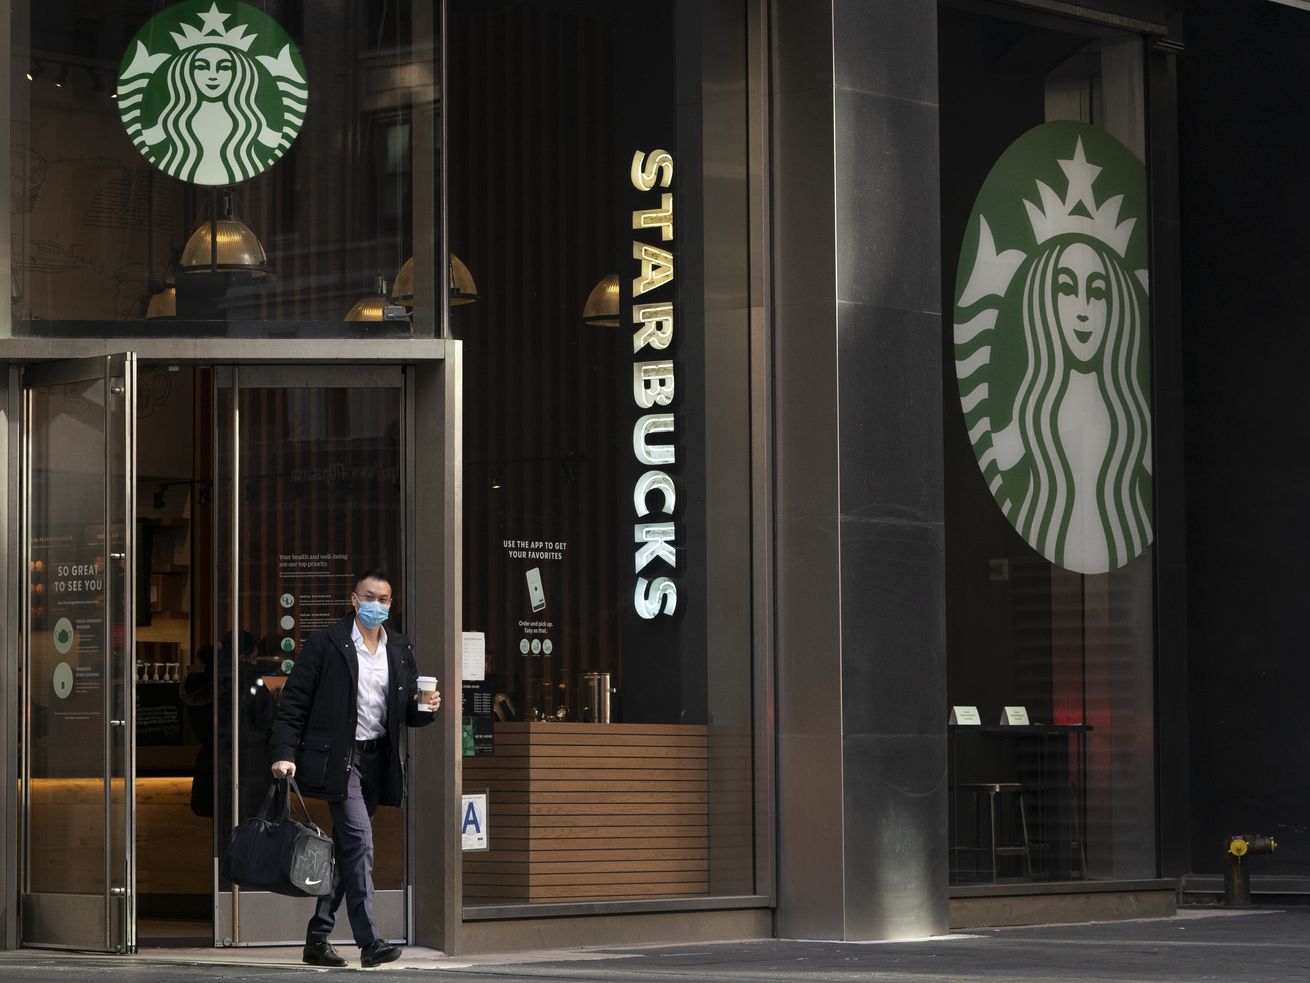 The Supreme Court struck down President Biden’s vaccine-or-test mandate for larger employers, but some businesses, like Starbucks, have imposed their own mandates.